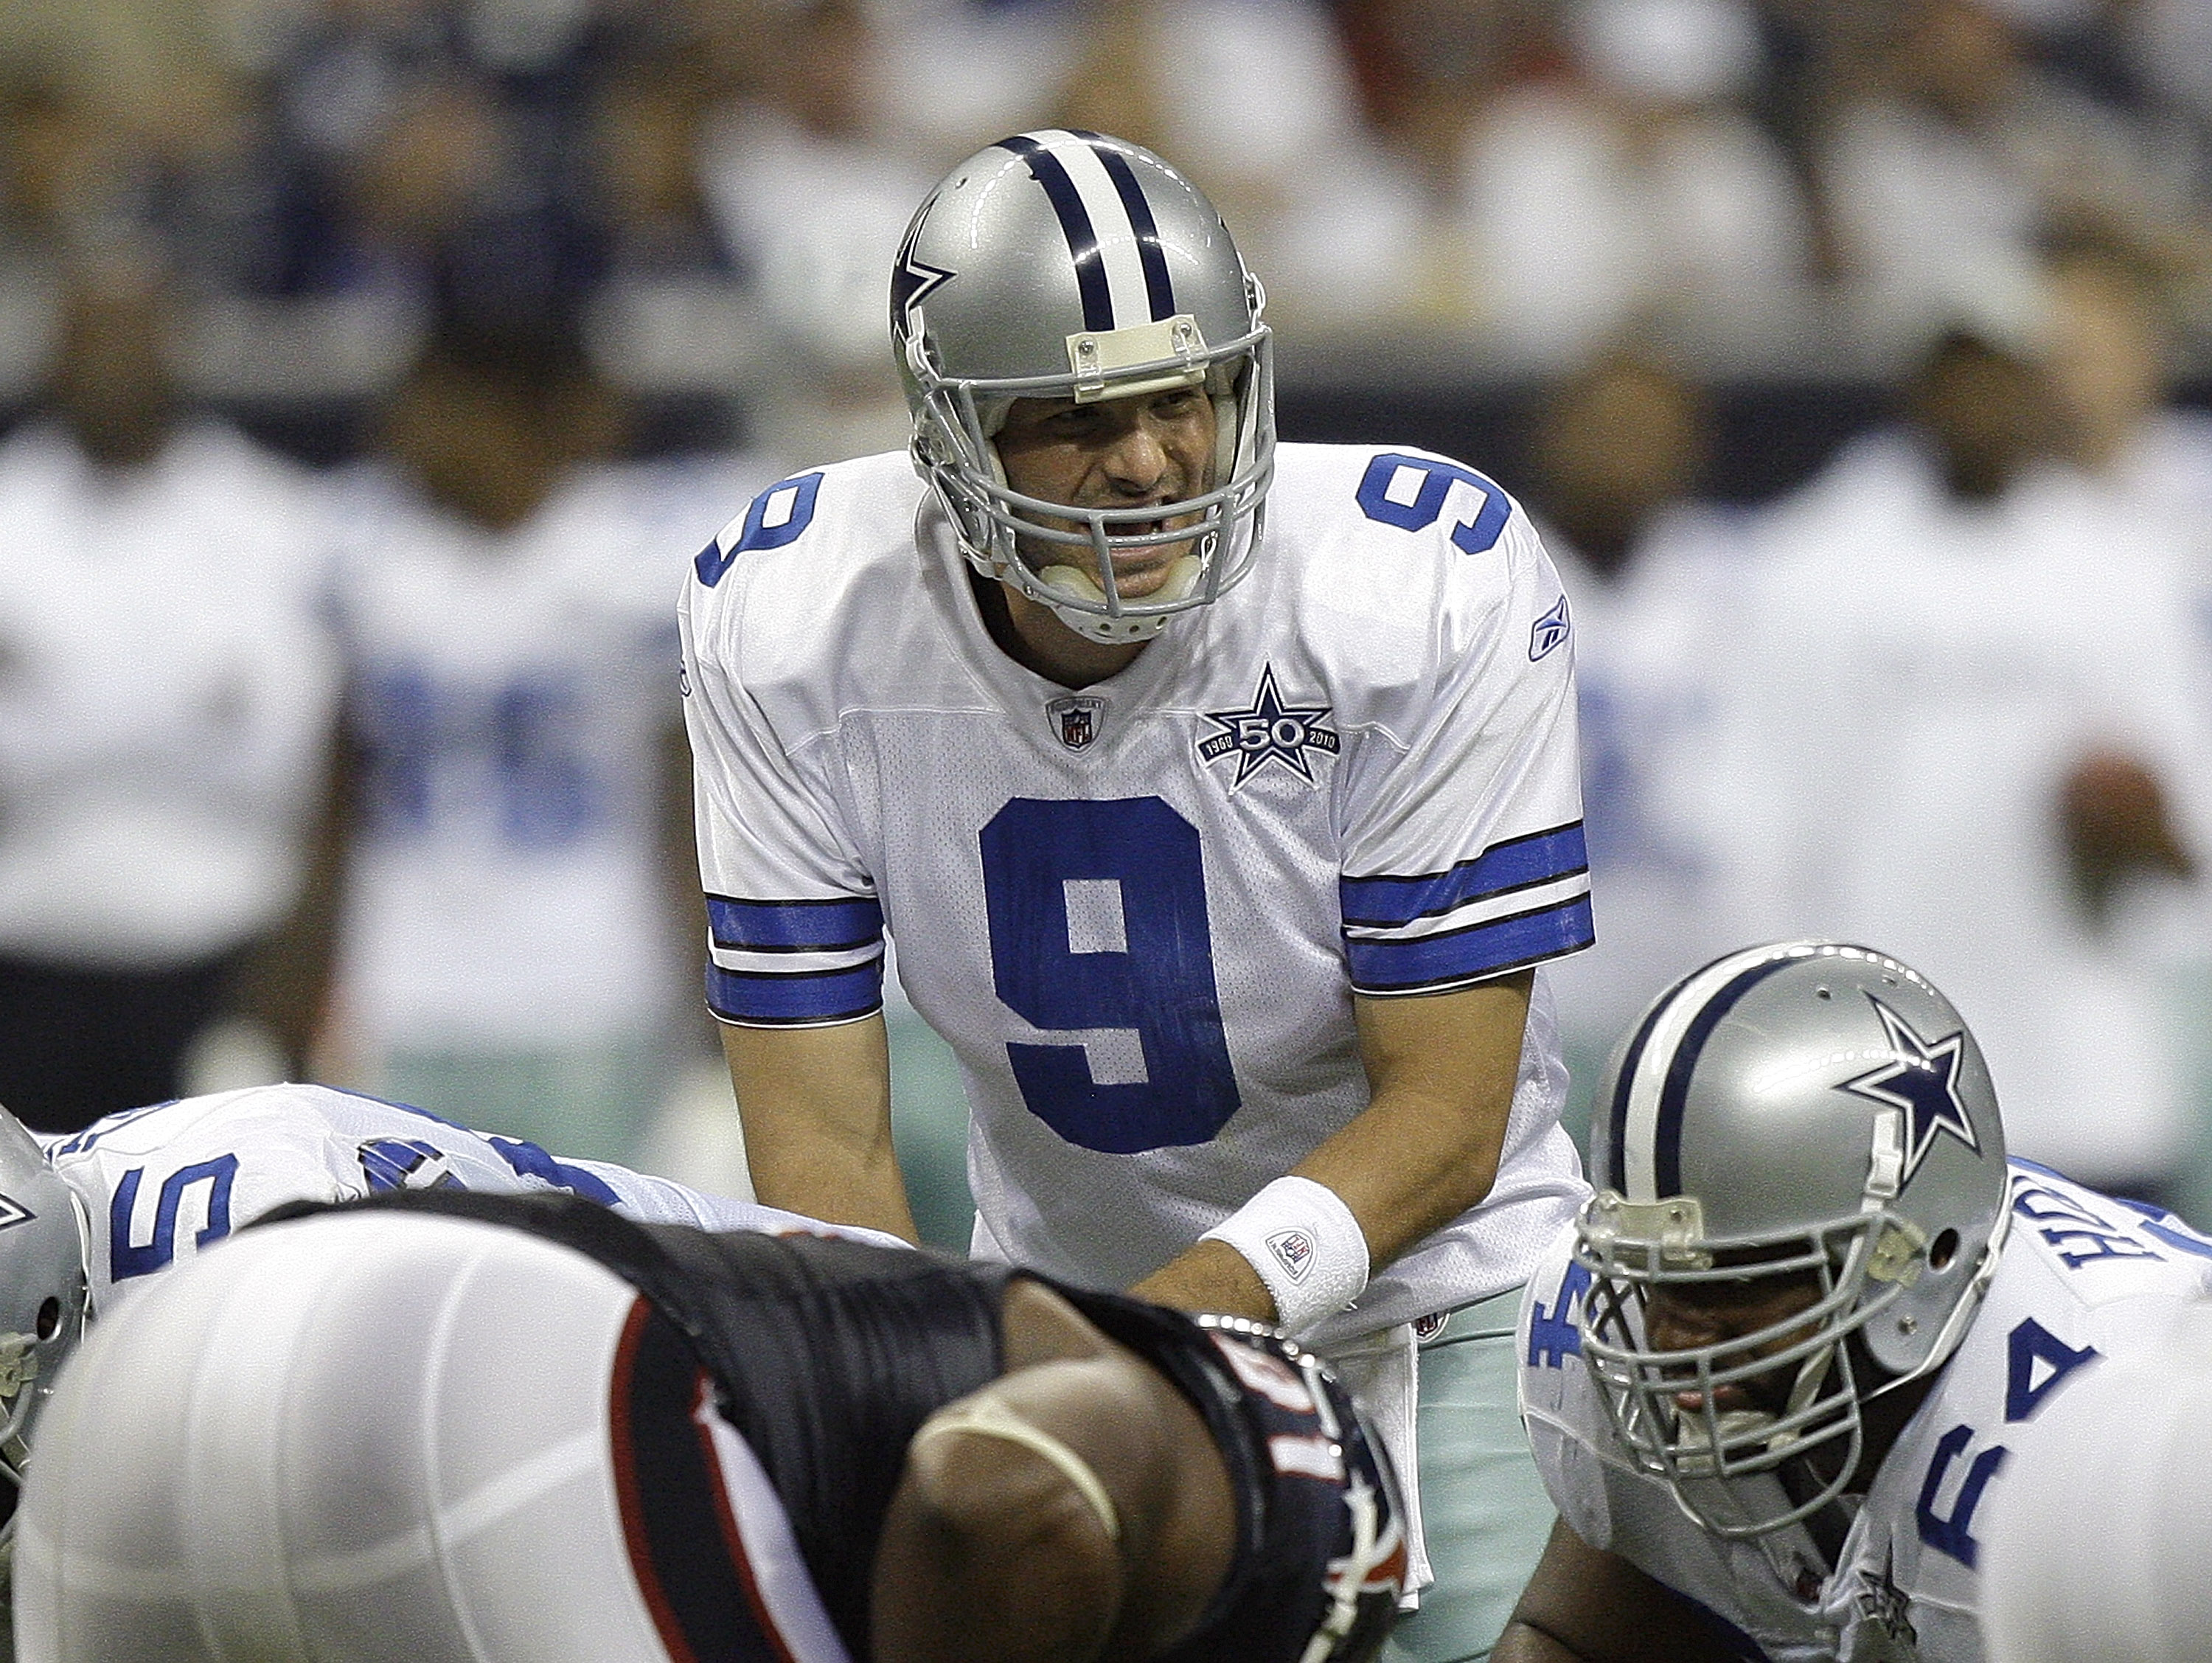 Where does Tony Romo rank among the best QBs without a Super Bowl